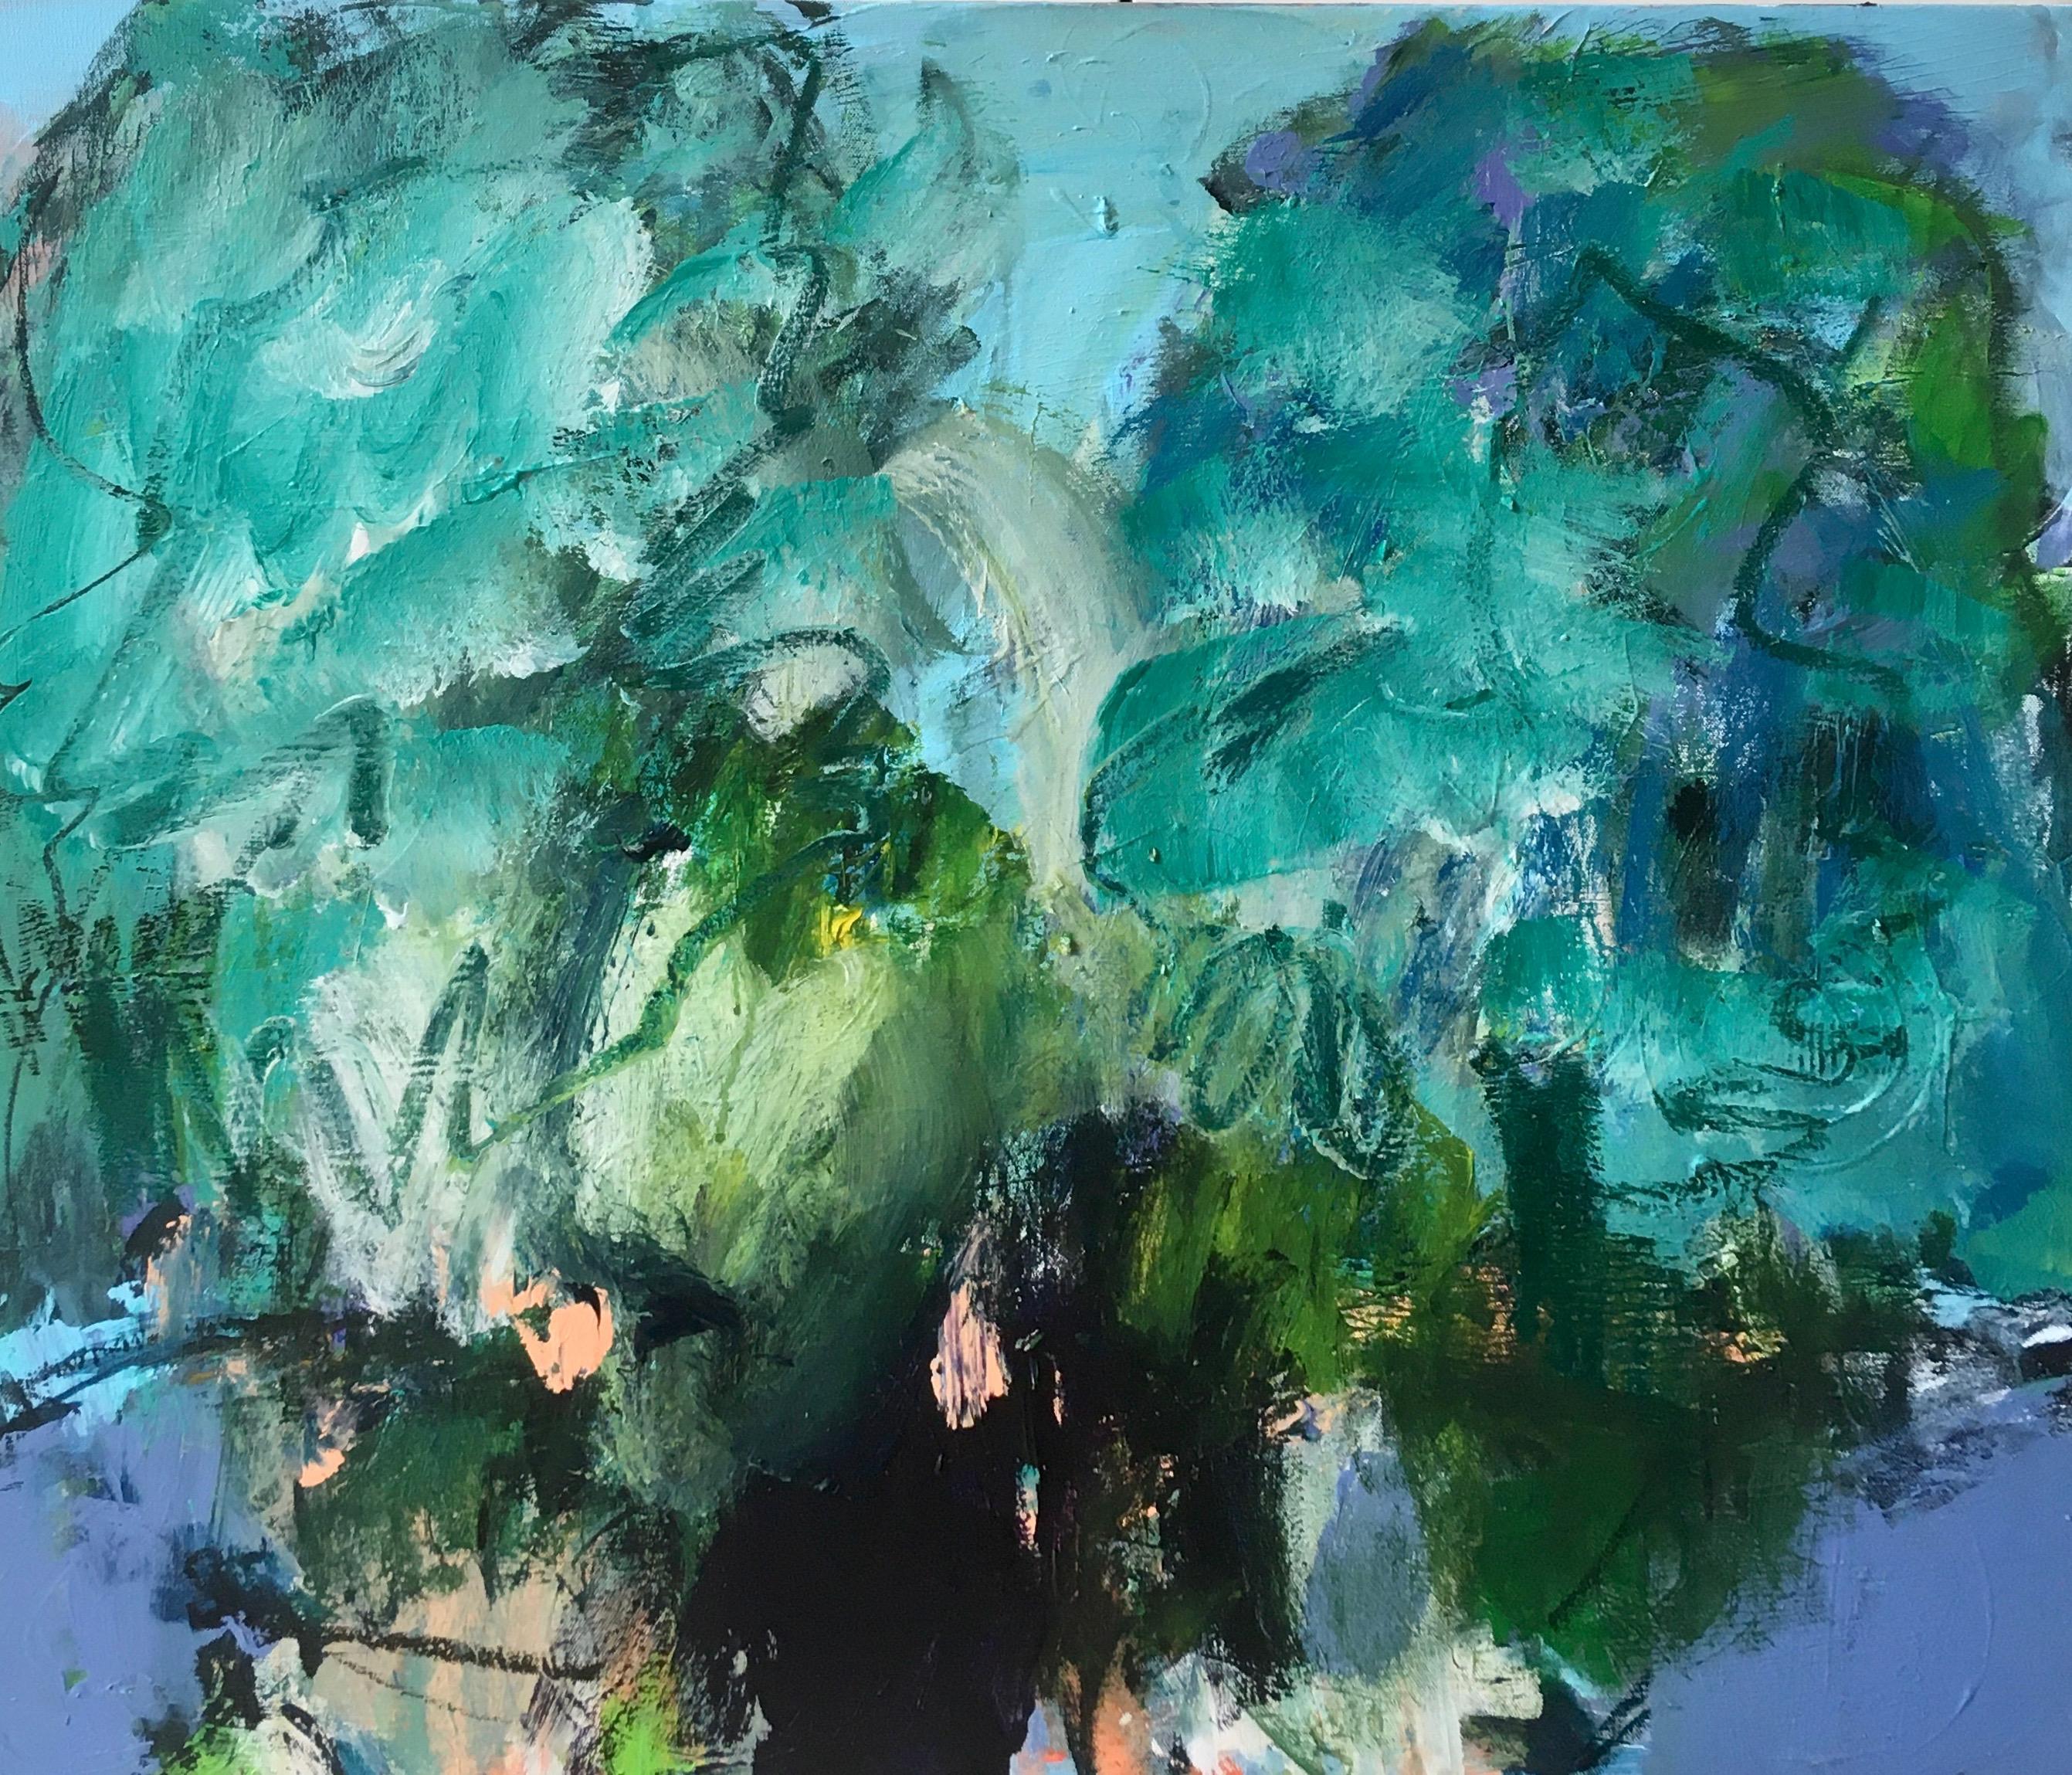 Deborah Lanyon Landscape Painting - Richmond Park I: Painting on canvas of Summer in the Park during the Lockdown